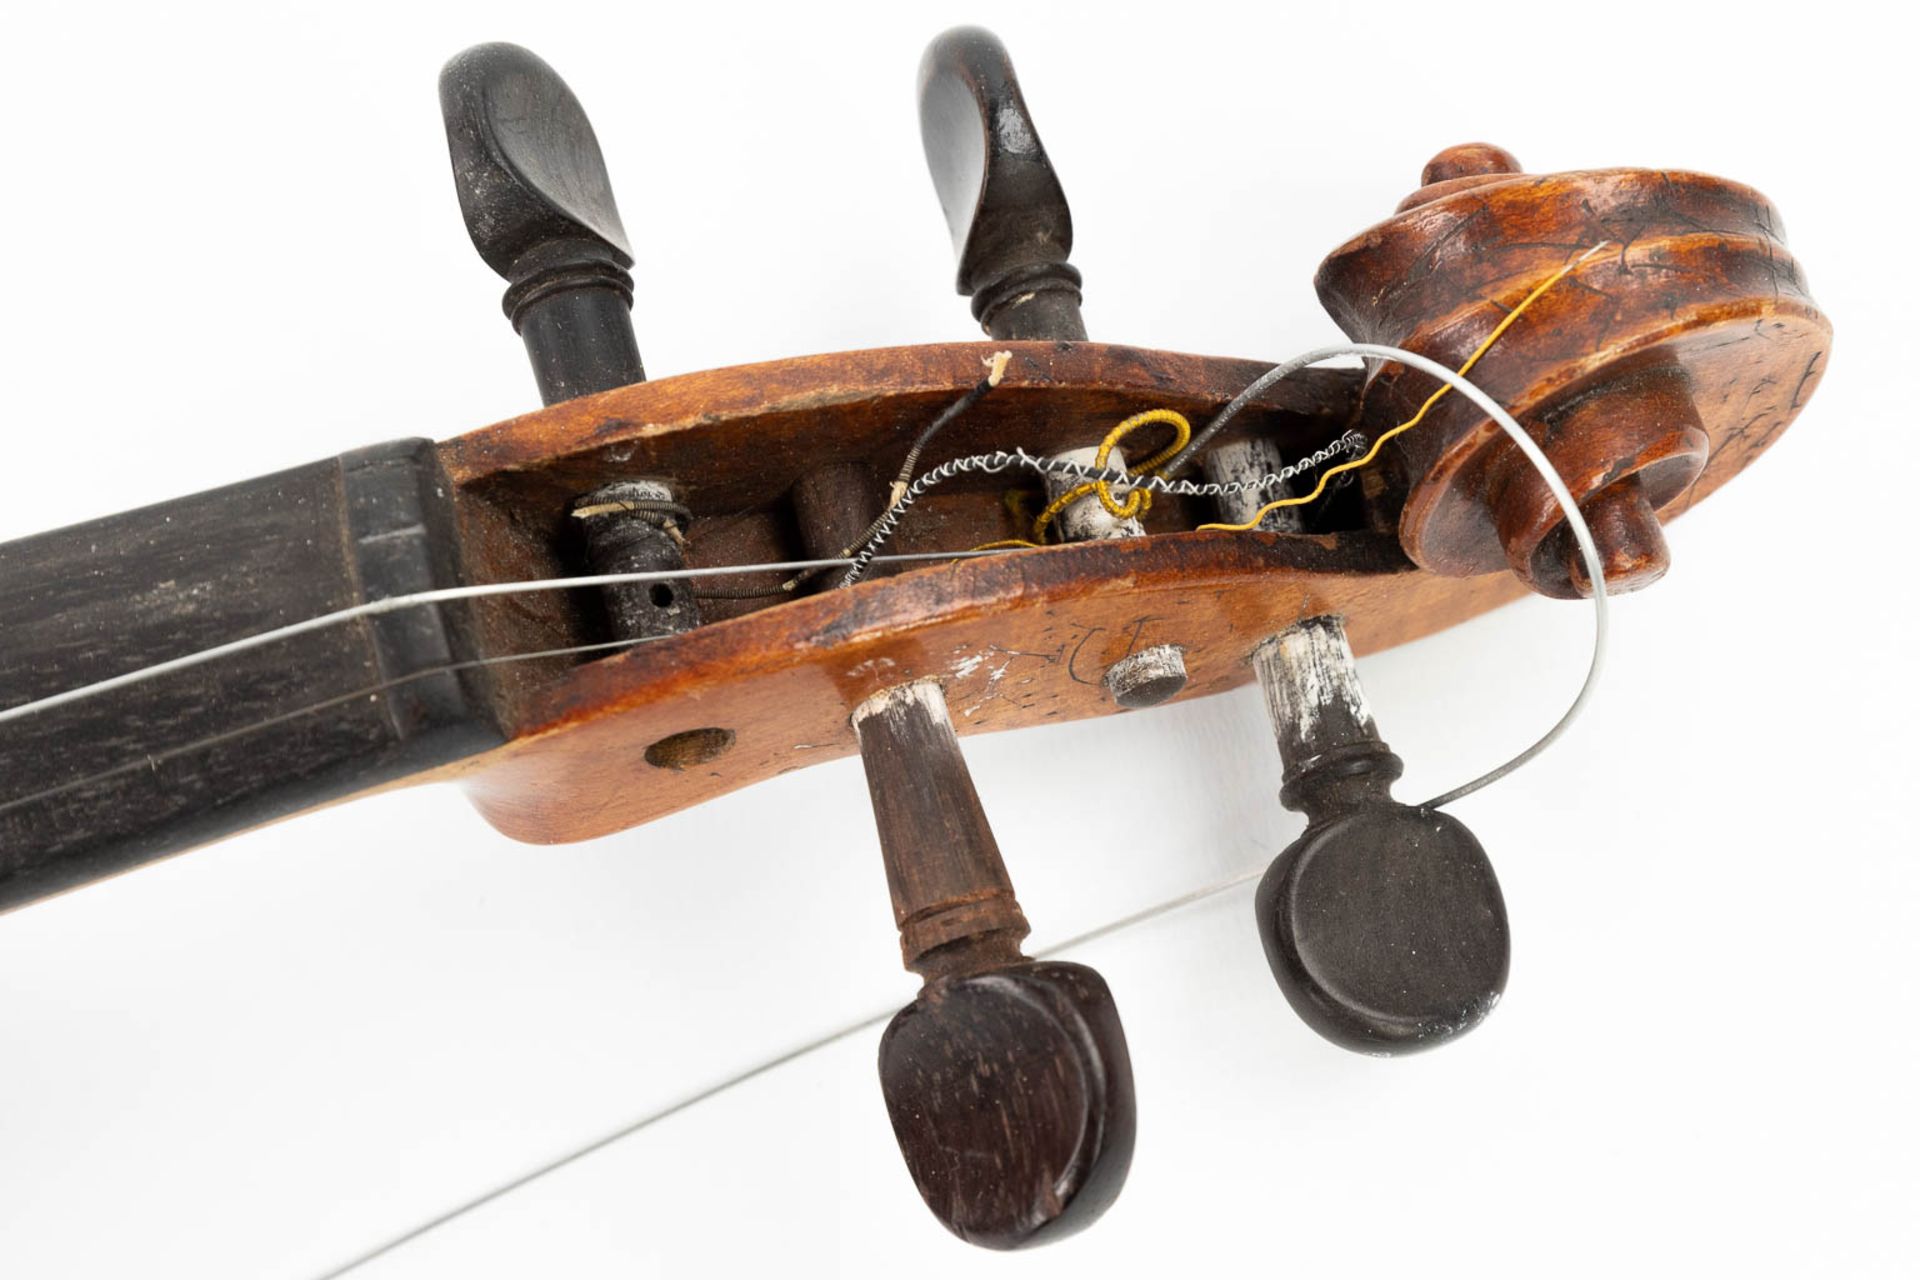 A collection of 3 musical instruments: 2 mandolines and a violin, after a model made by Stradivarius - Image 21 of 56